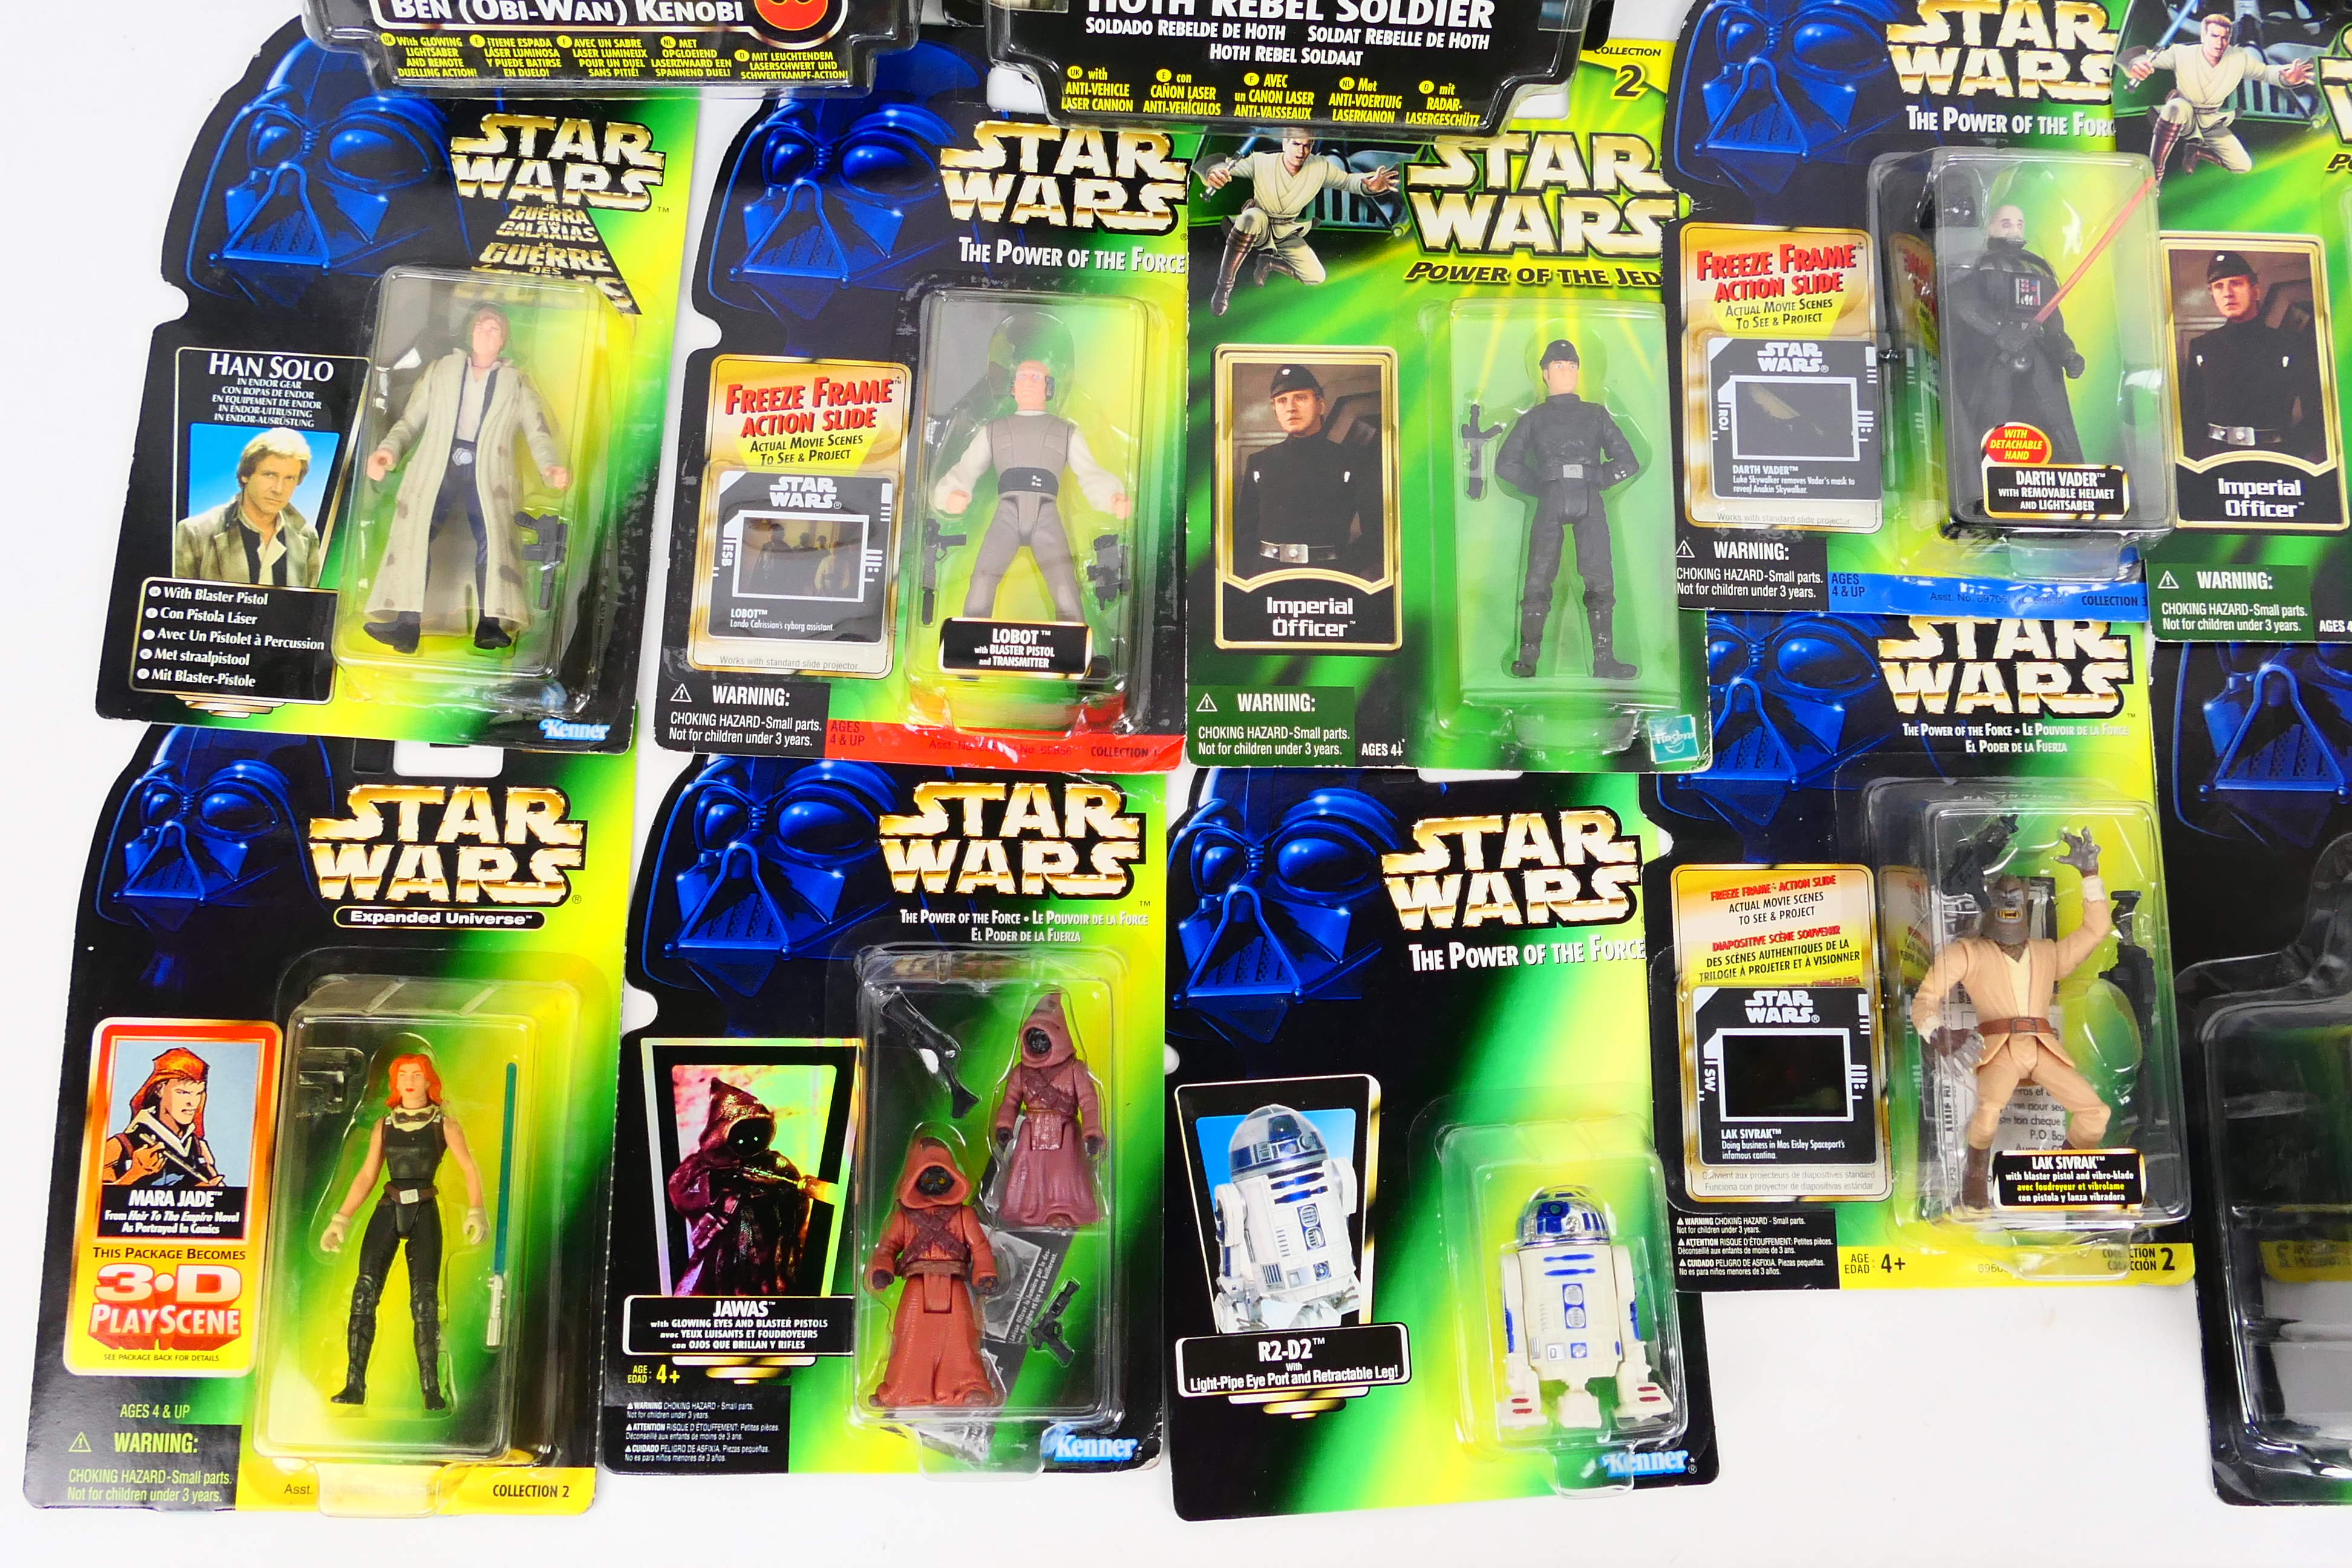 Kenner - Star Wars - 20 x carded figures including Deluxe Hoth Rebel Soldier, Han Solo, - Image 3 of 6